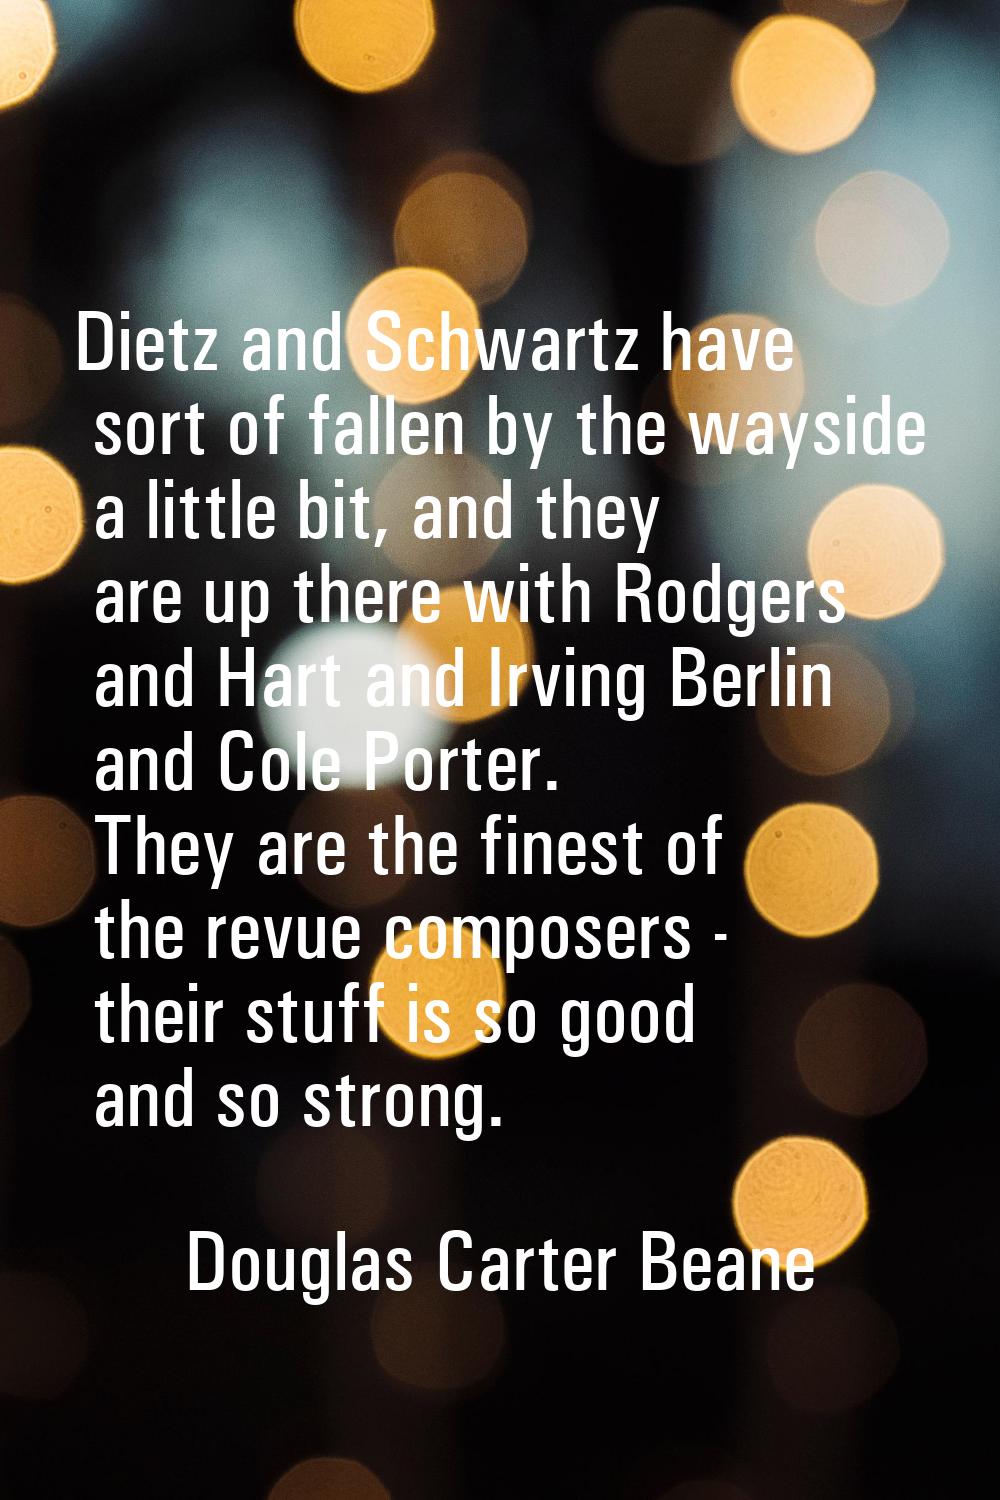 Dietz and Schwartz have sort of fallen by the wayside a little bit, and they are up there with Rodg